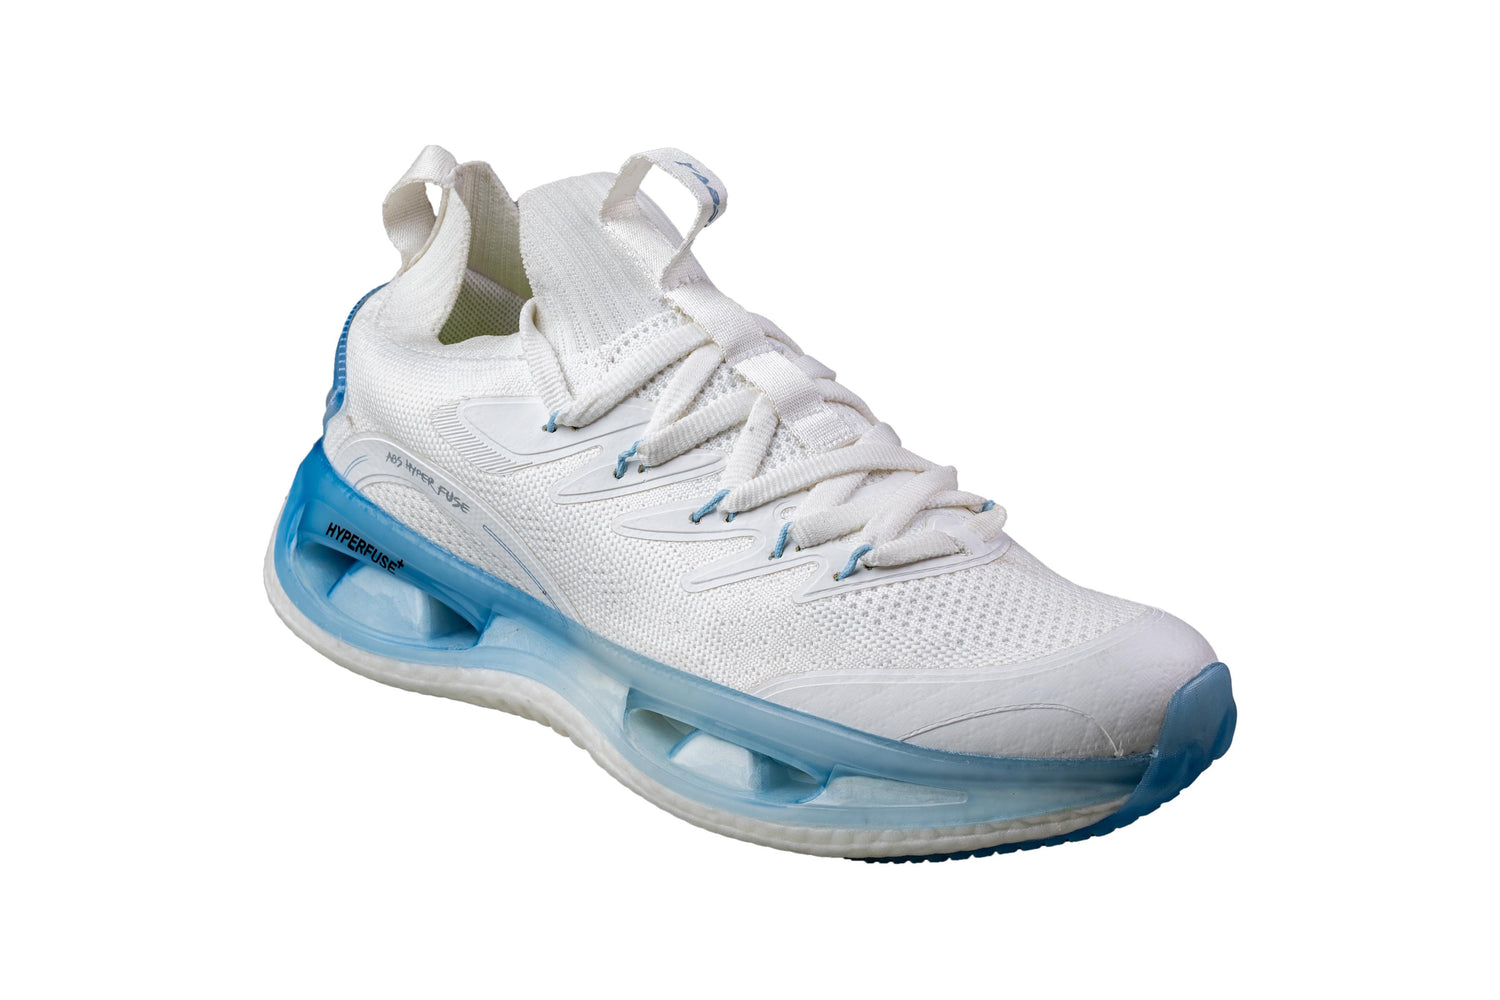 Abros Gents White / Ice Blue Sports Shoe